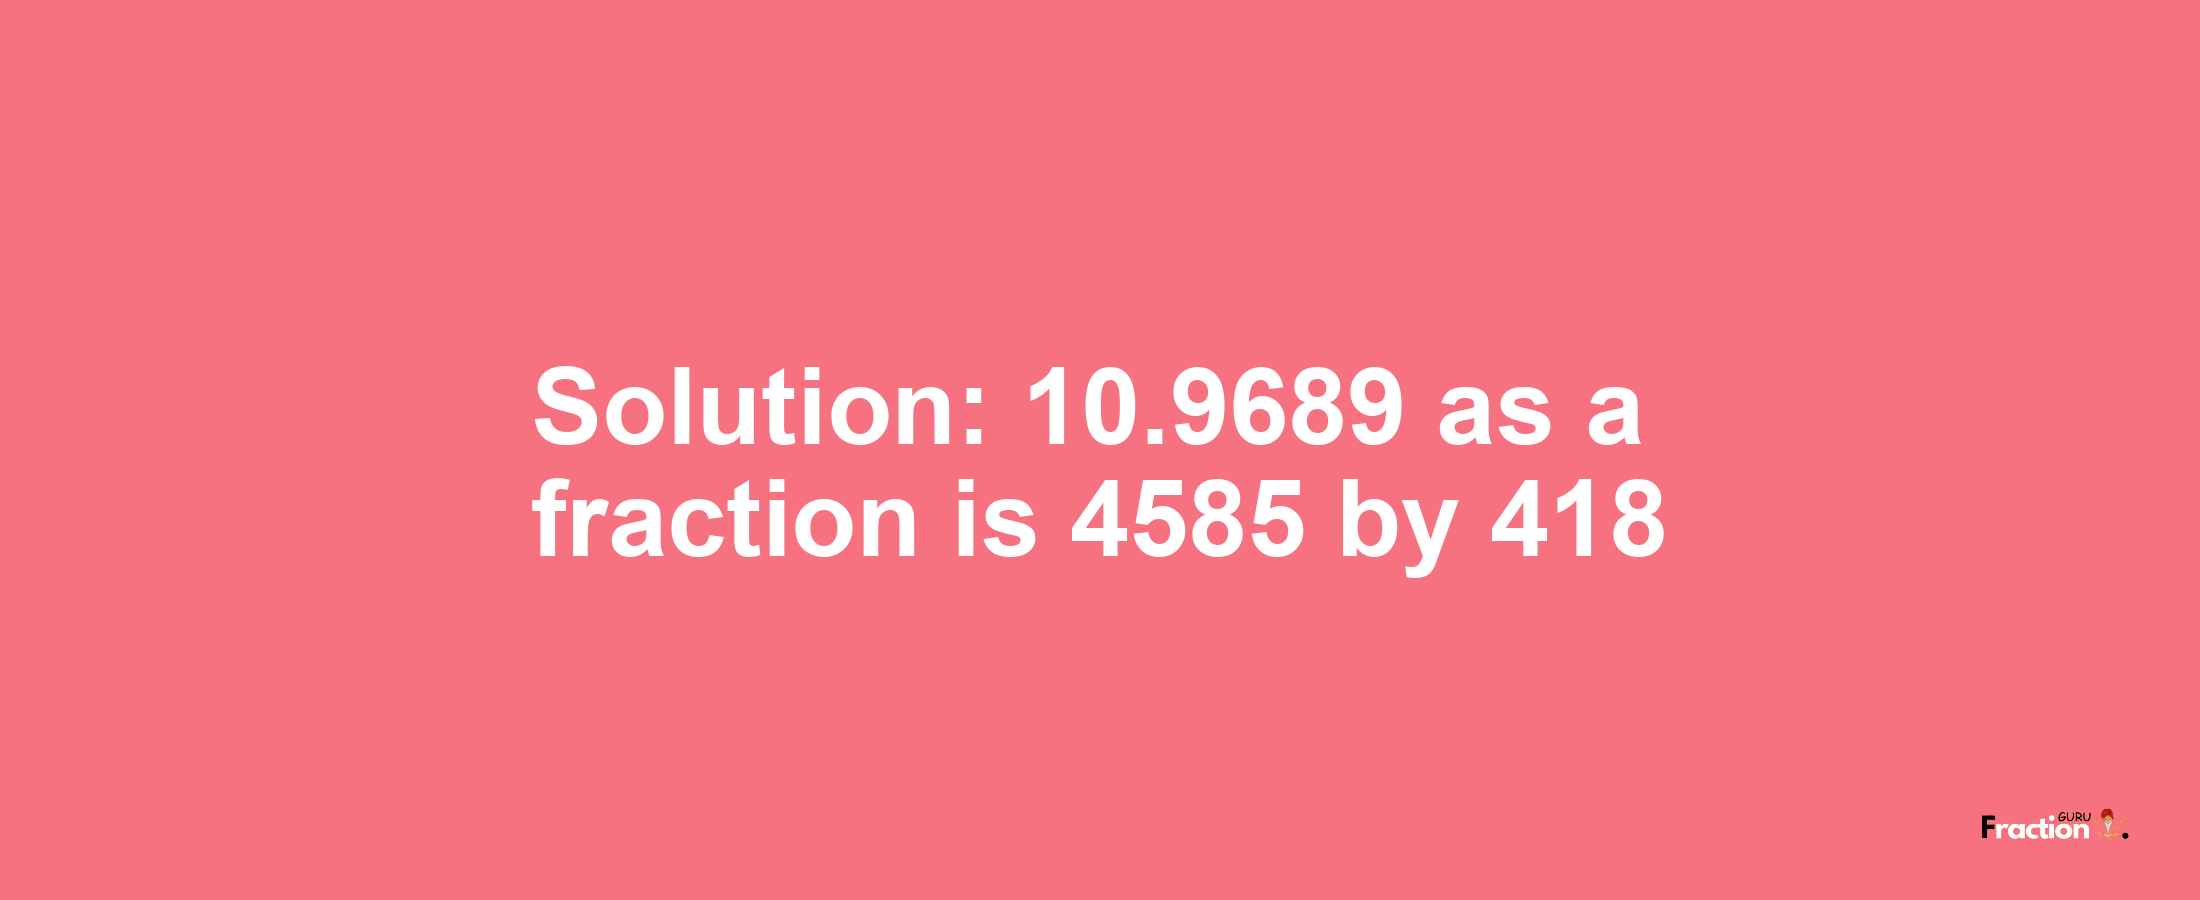 Solution:10.9689 as a fraction is 4585/418